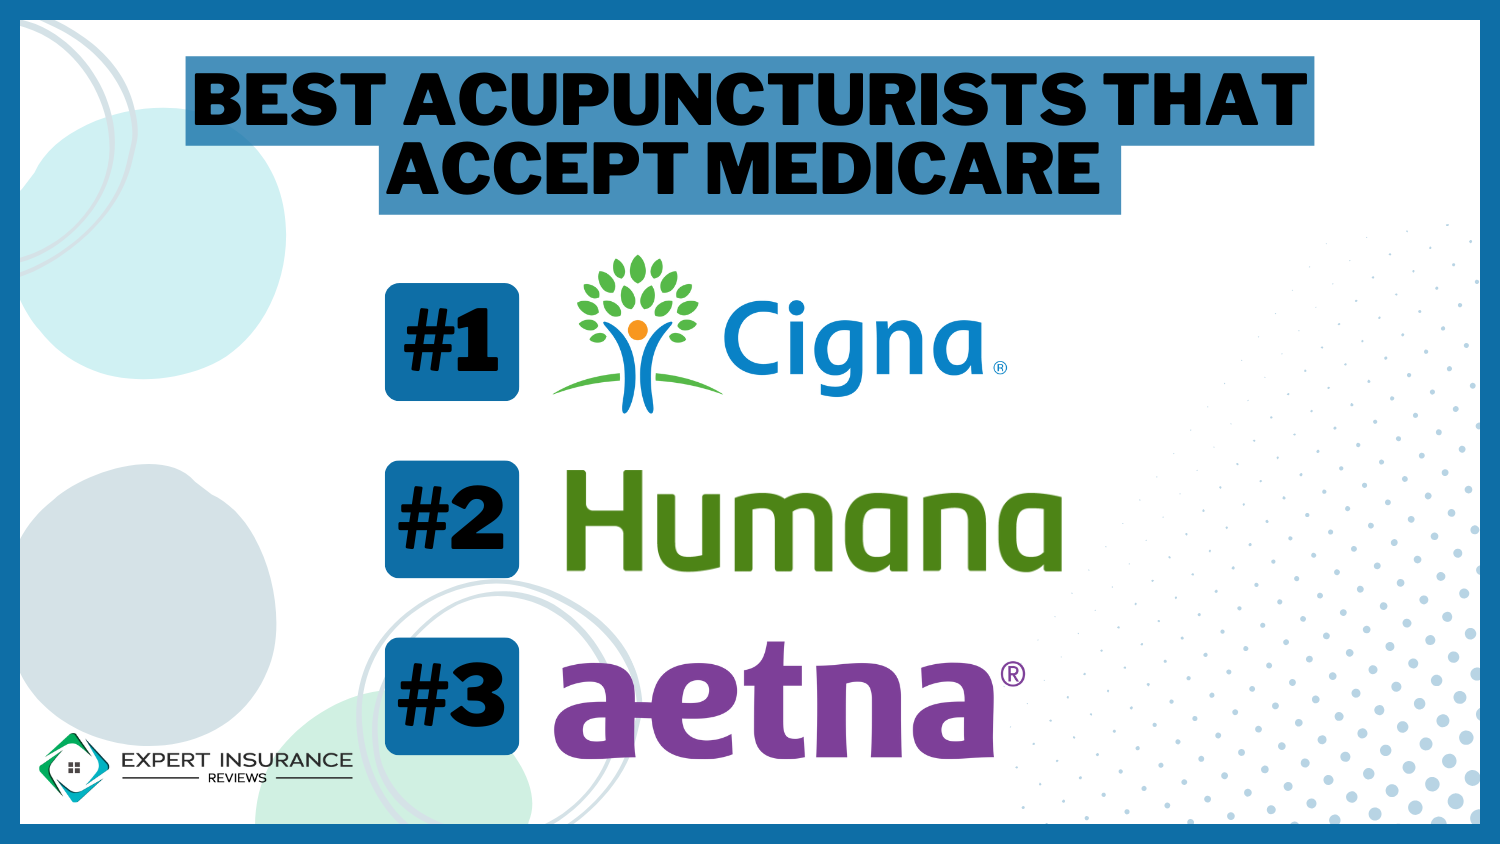 Best Acupuncturists That Accept Medicare: Cigna, Humana, and Aetna